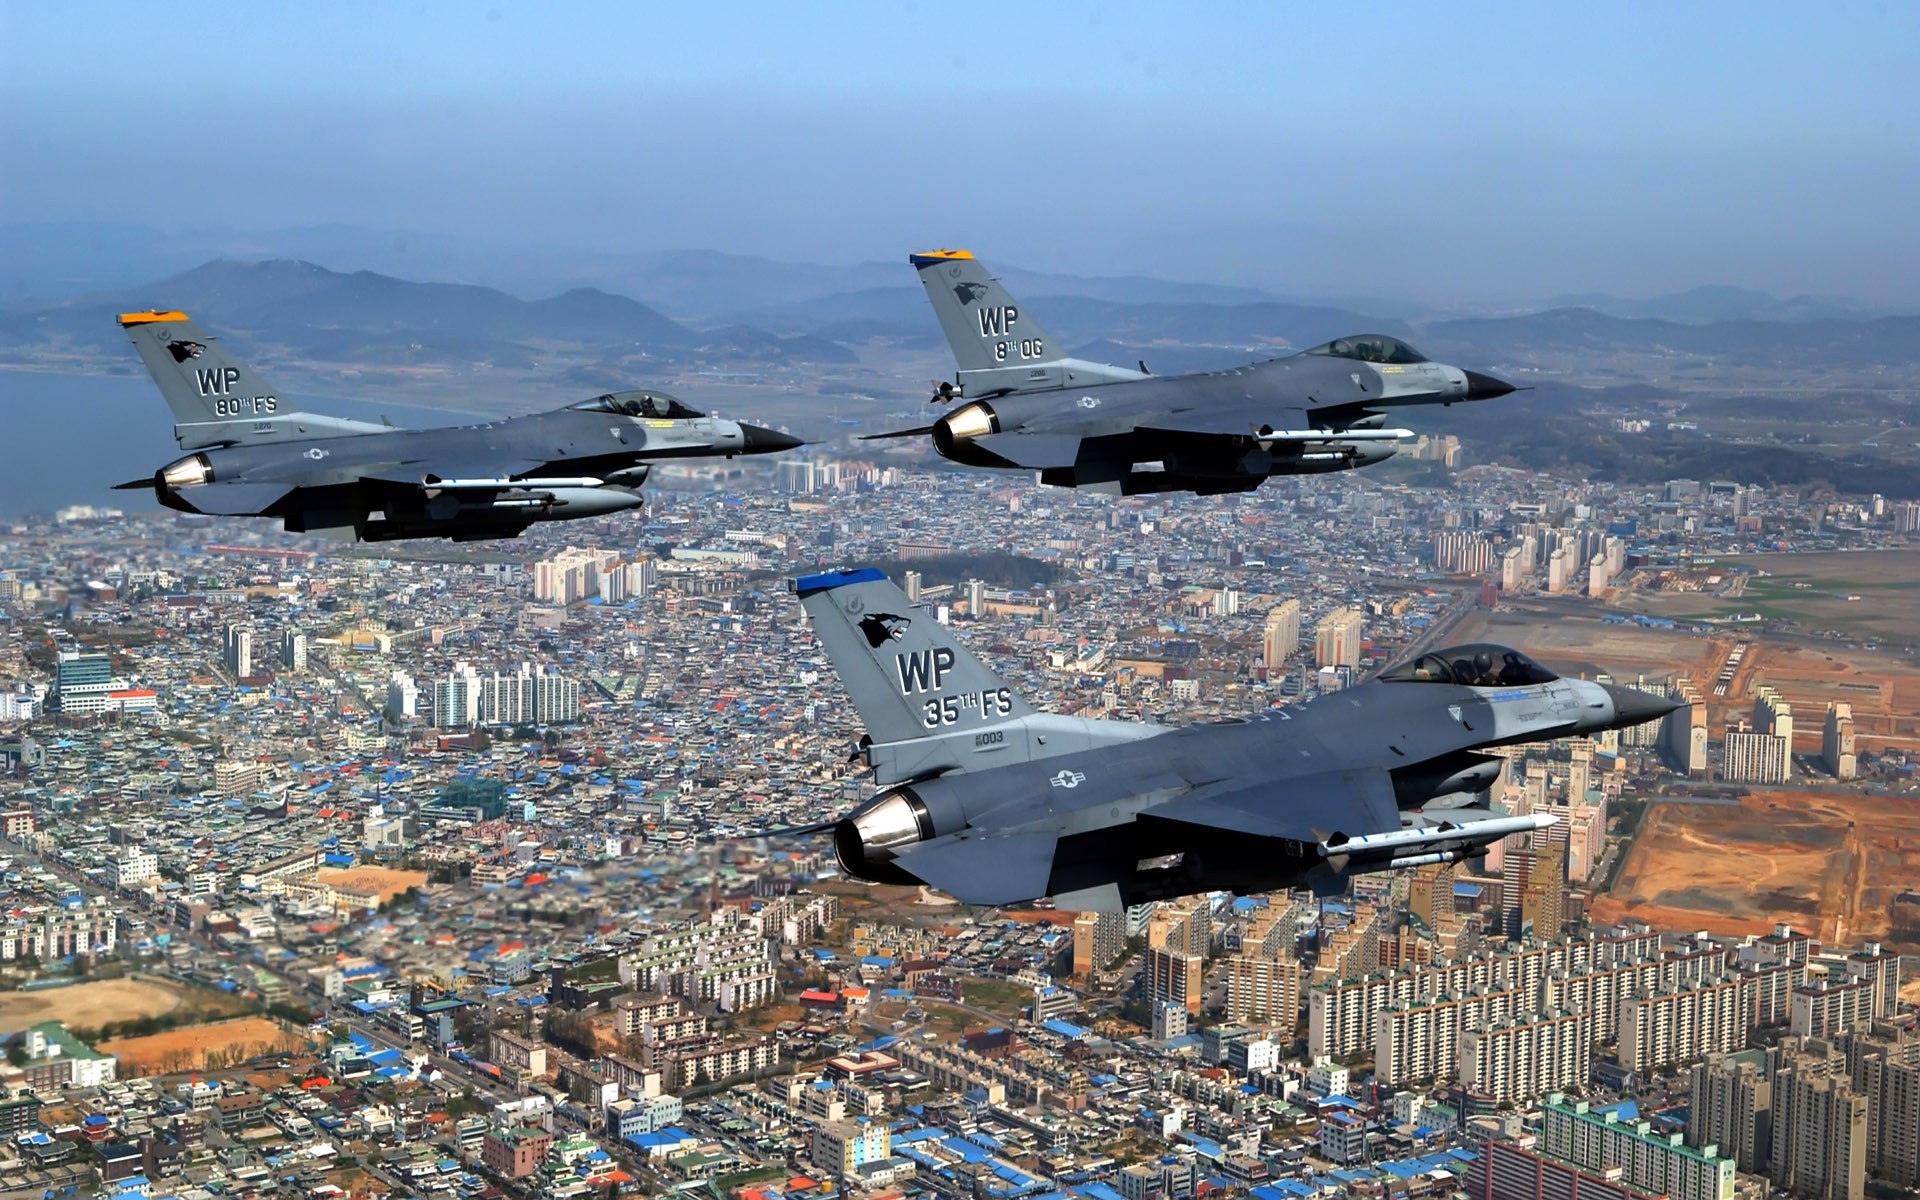 General 1920x1200 General Dynamics F-16 Fighting Falcon jet fighter airplane military military vehicle vehicle military aircraft Formation US Air Force jets American aircraft General Dynamics aircraft cityscape city flying building